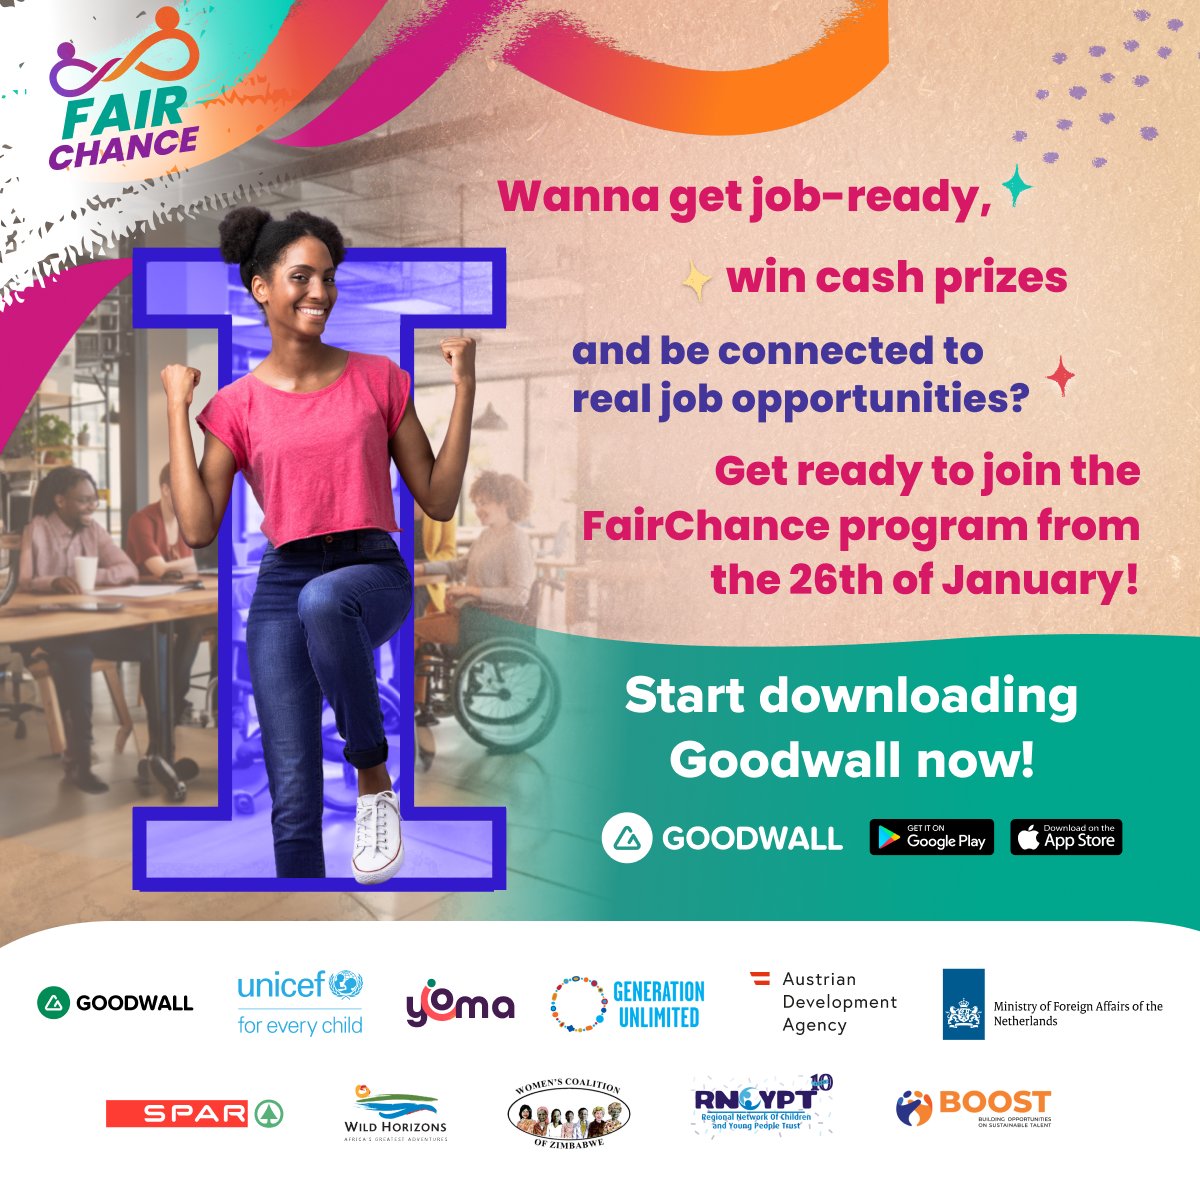 📣 LISTEN UP!! An EXCITING opportunity for unique 🇿🇼  females aged 18-26, to join the FairChance program. We are offering a platform to win cash prizes and real job opportunities,  to showcase YOU!  To participate, download the Goodwall App, or Whatsapp👉 twtr.to/Y2-3F